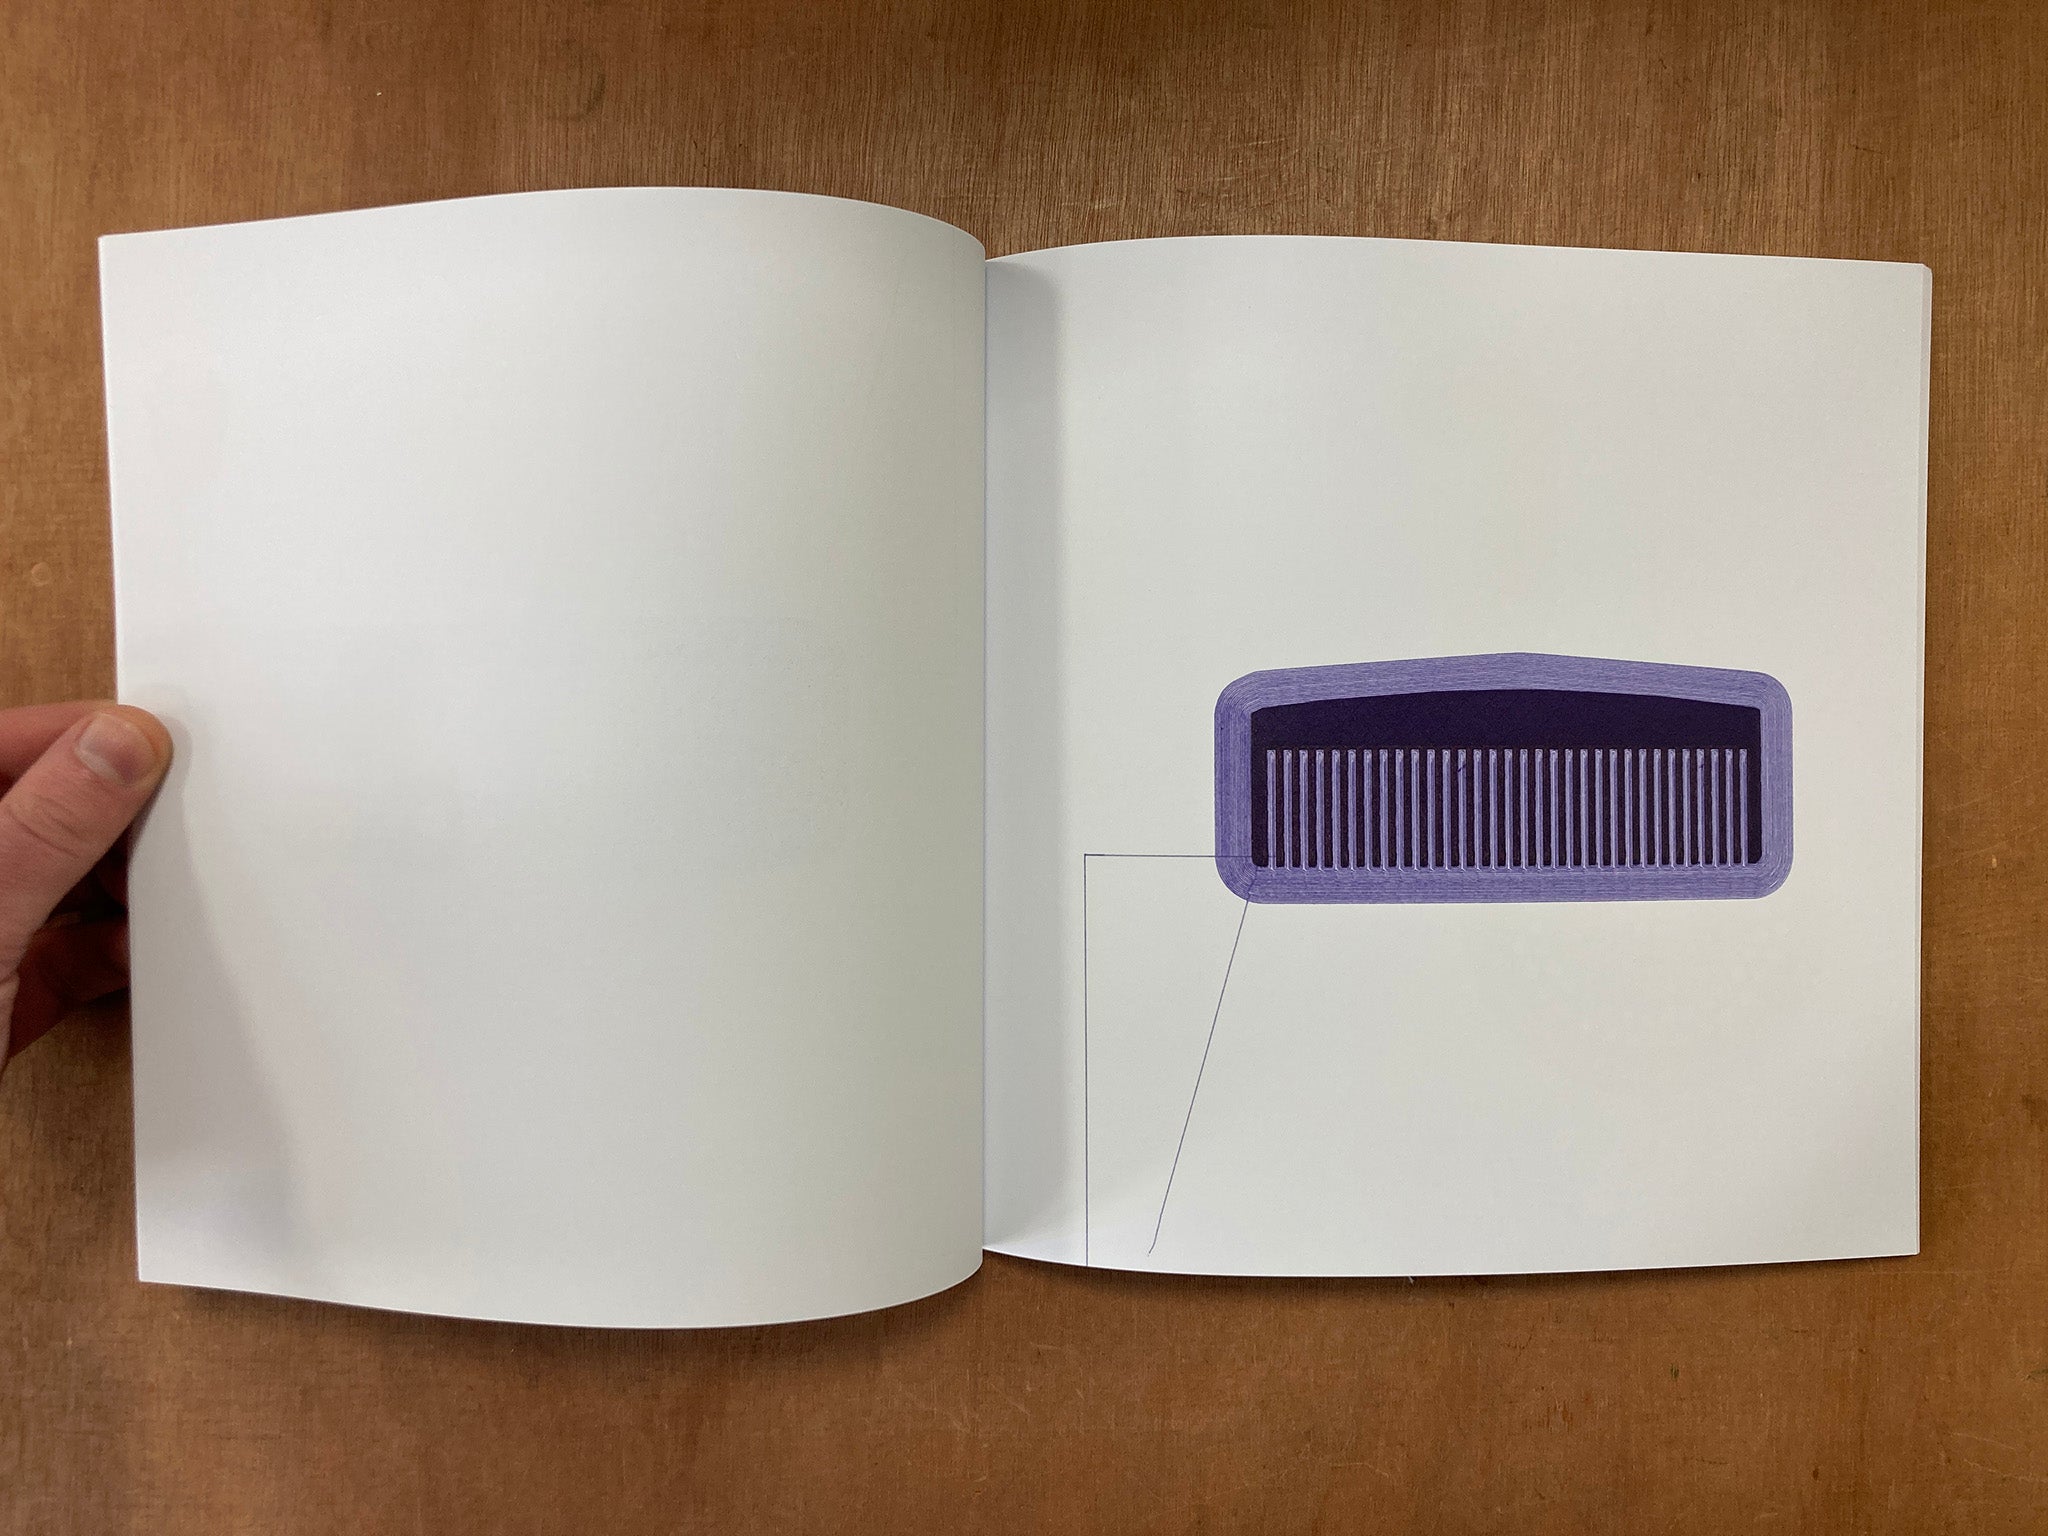 PRINTER TRAILS (3D Printer Drawings) by Will Peck